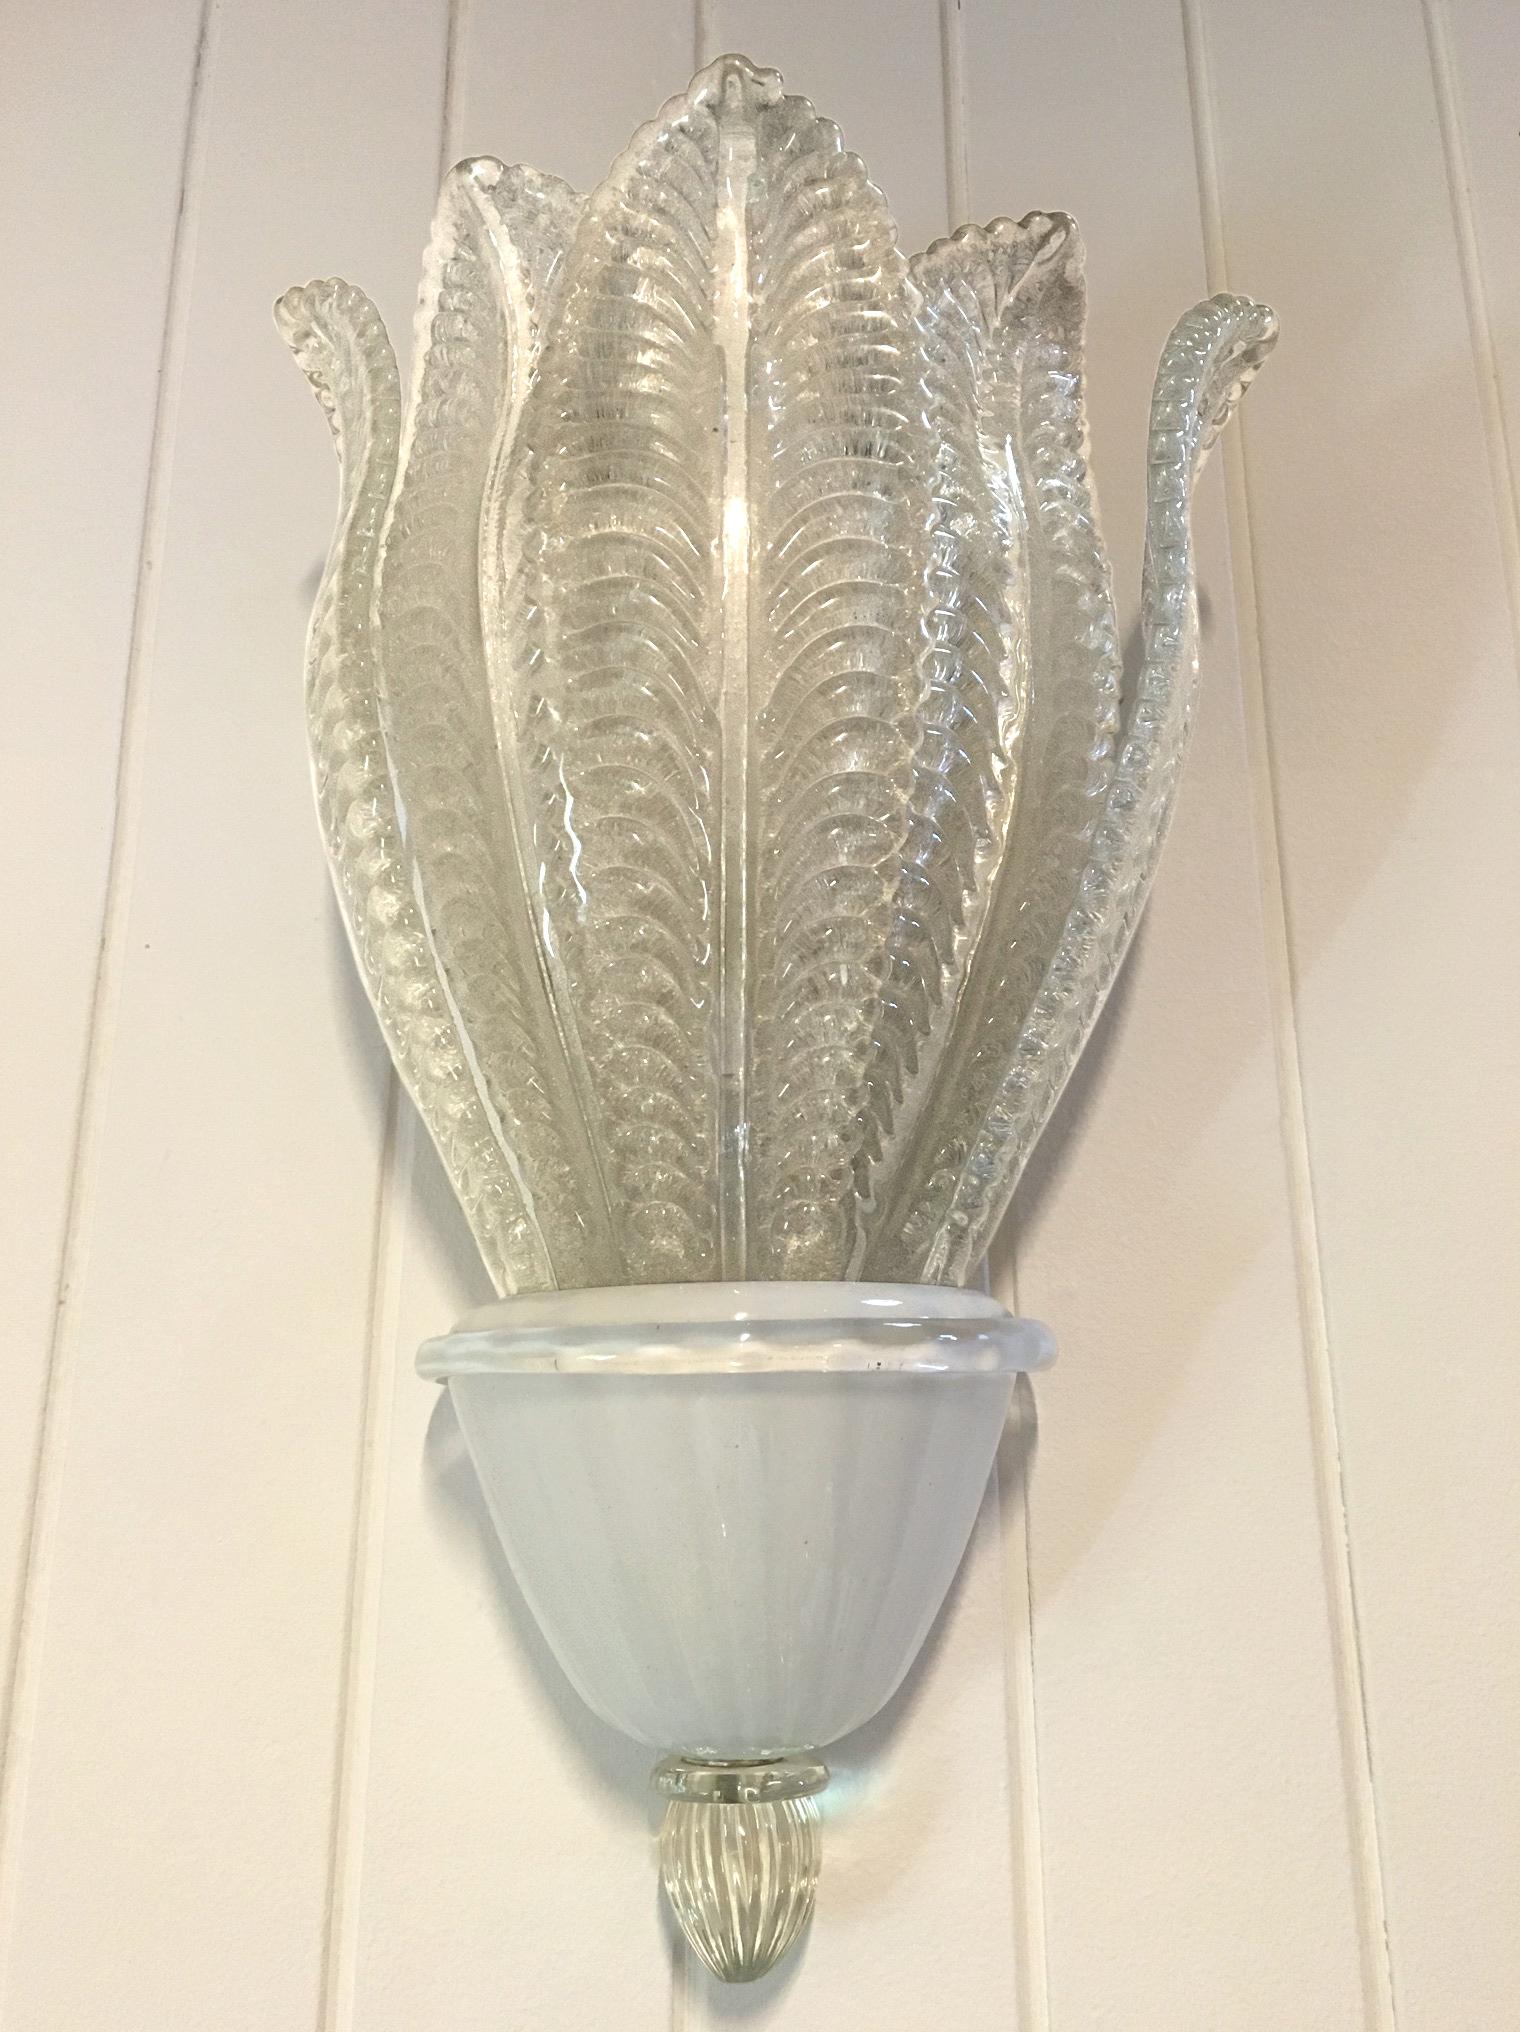 A large glass leaf sconce by Barovier, with original labels. (Priced Per Item)

Italian, Circa 1960's

Five (5) Scones Are Available and Two (2) Chandeliers.

Each Sconce: $6,500.00